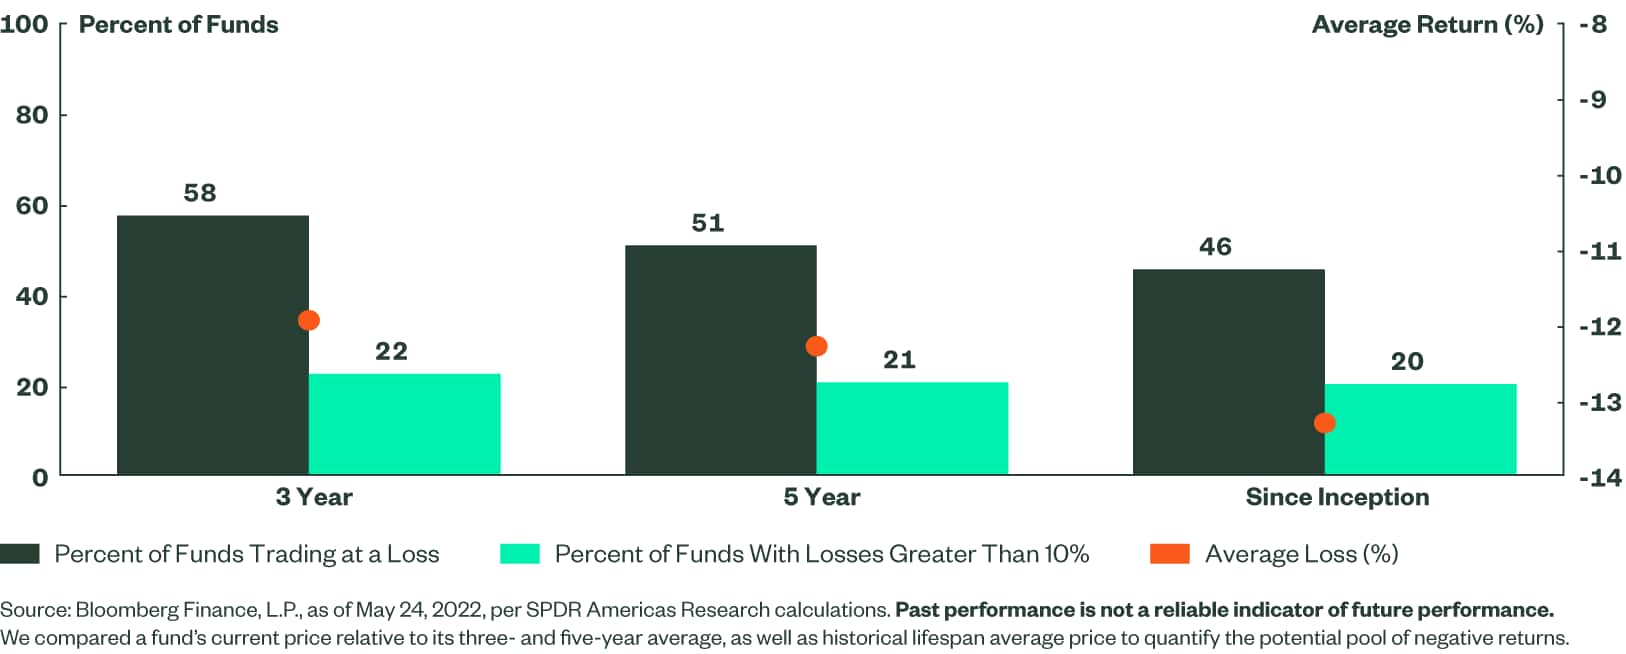 Figure 4: Percent of Funds With Losses Based on Average Period Price